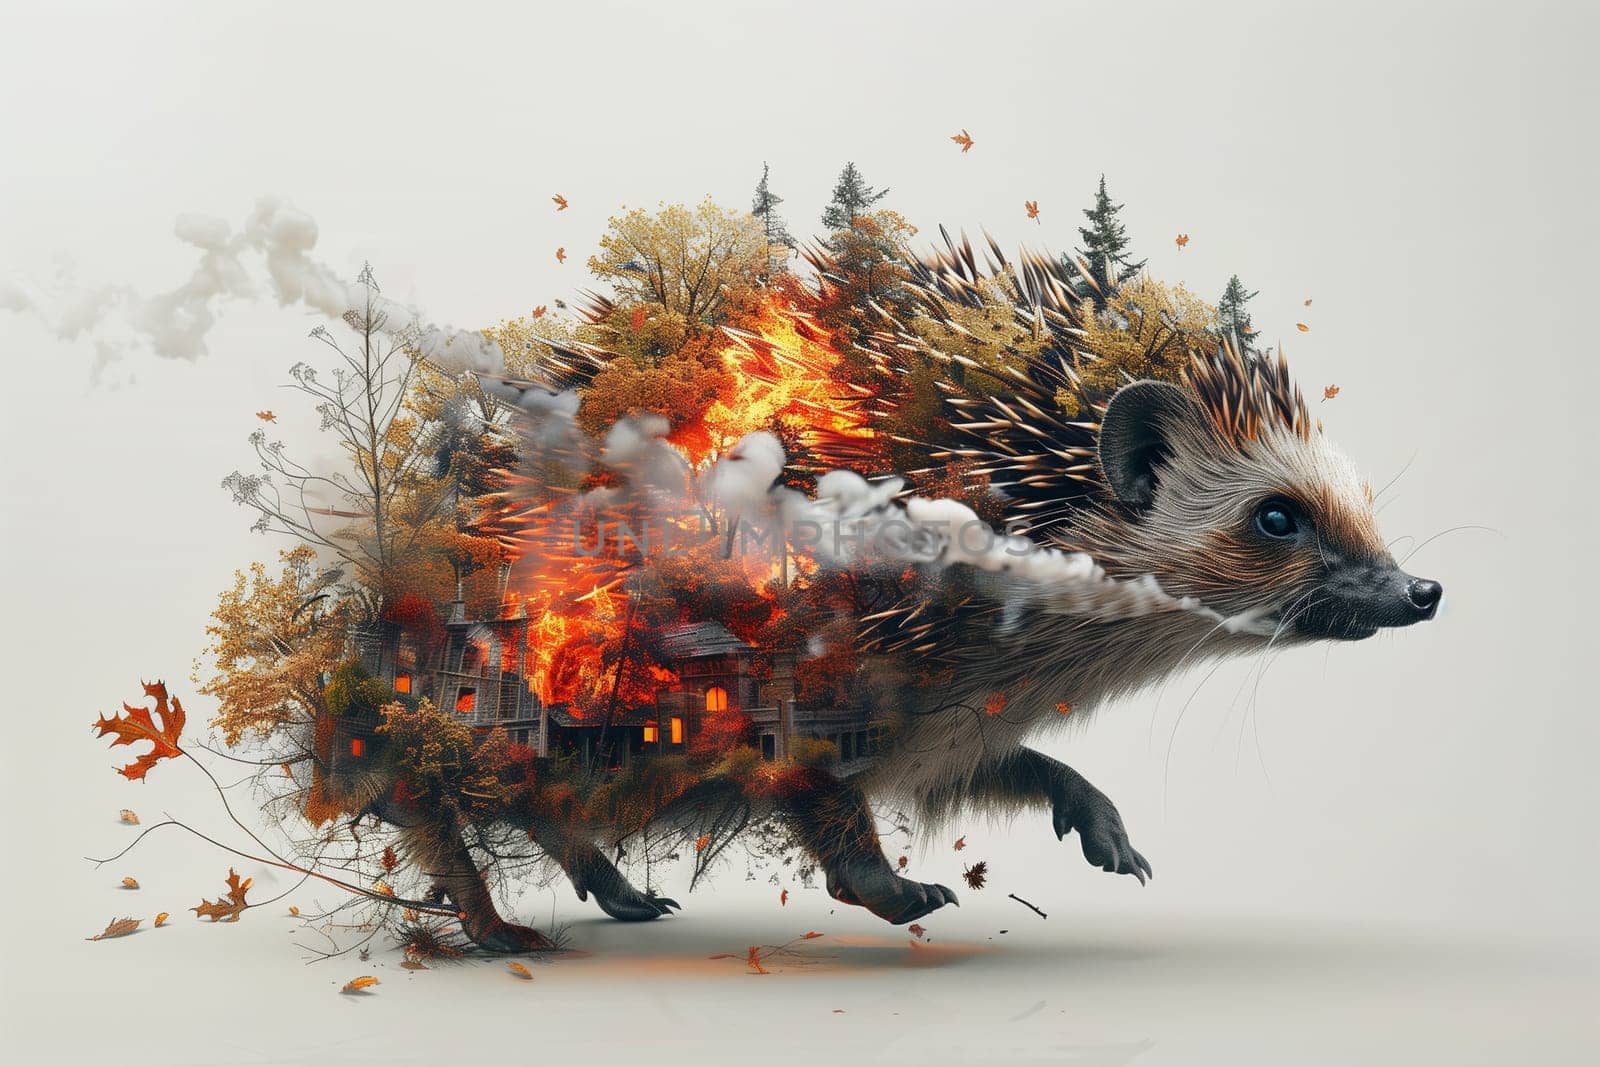 A hedgehog runs as a forest fire rages behind, with trees ablaze and smoke rising, highlighting the danger to wildlife and ecosystems.